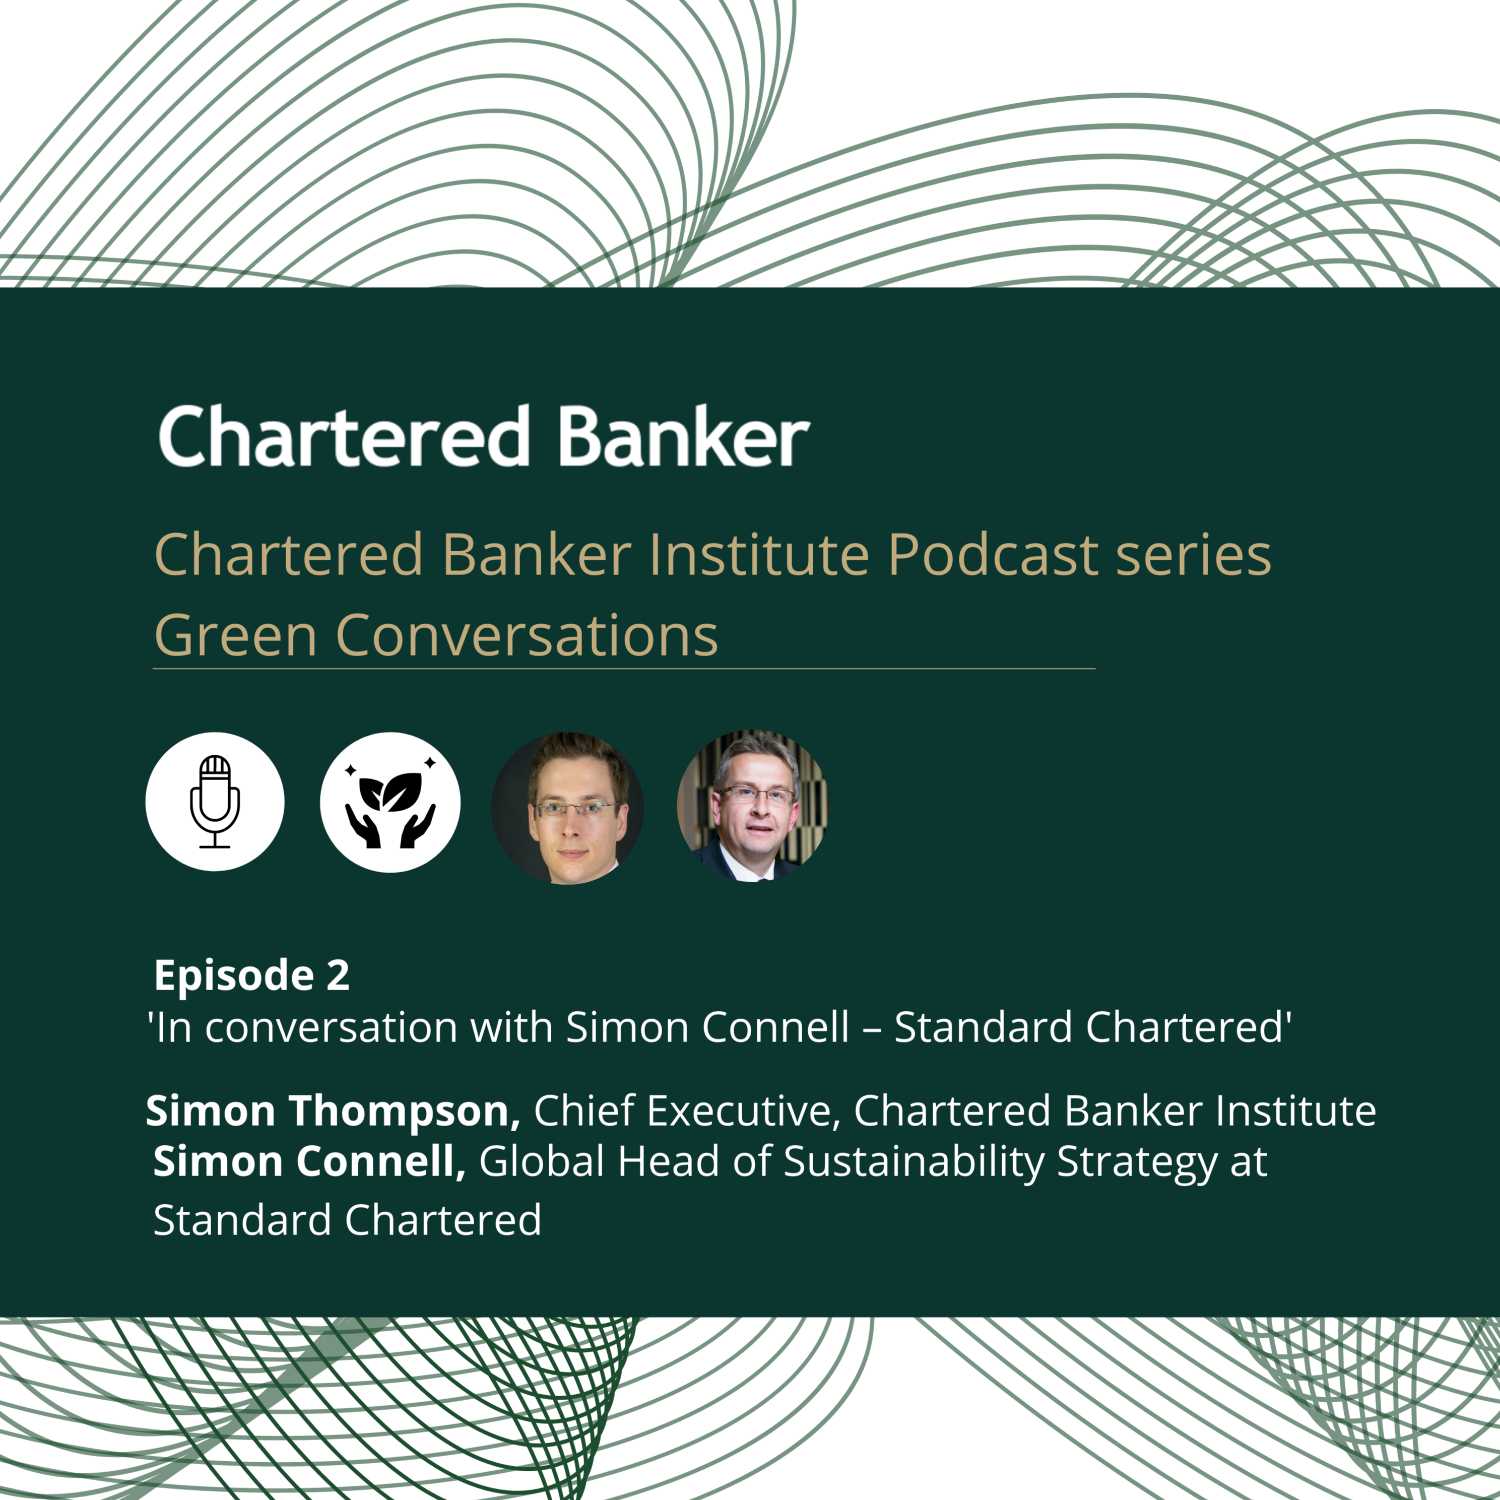 S3 E2 In conversation with Simon Connell from Standard Chartered - Green Conversations